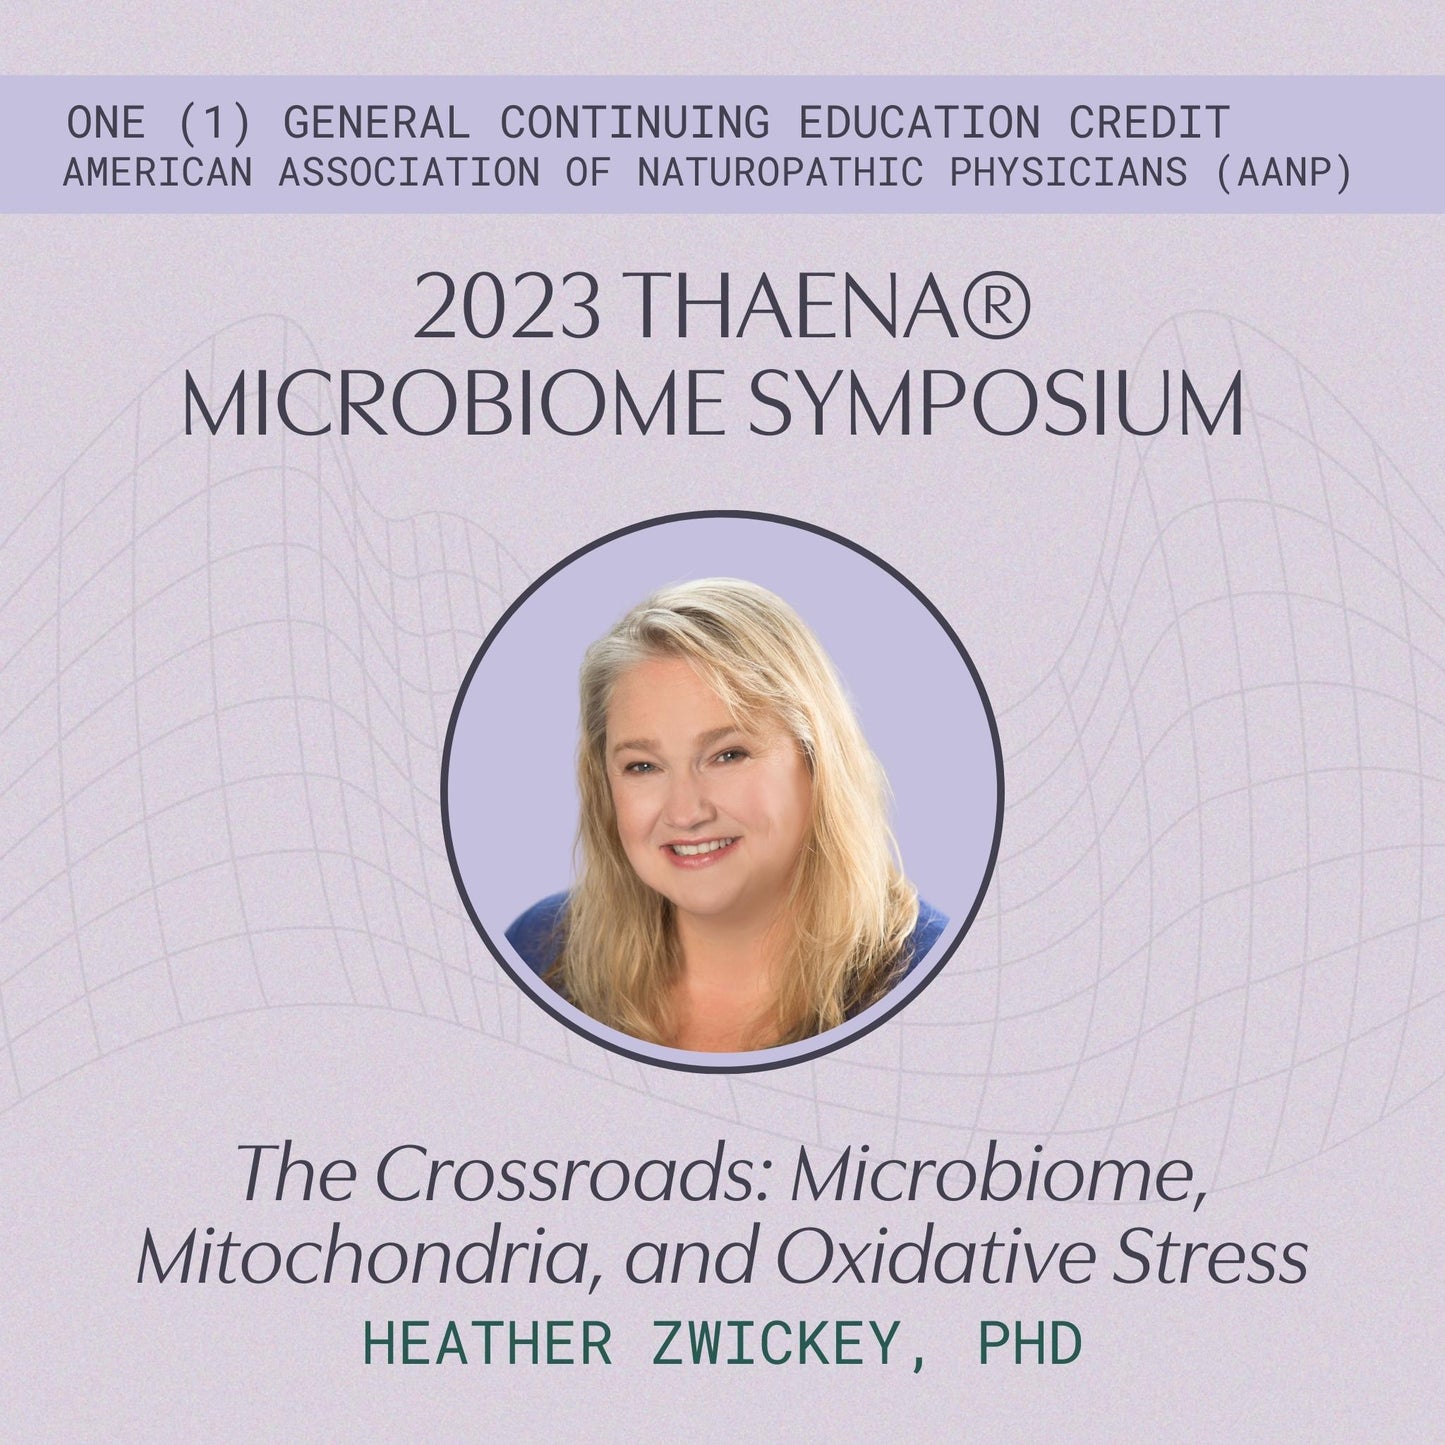 Heather Zwickey, PhD - The Crossroads: Microbiome, Mitochondria, and Oxidative Stress (1 General CE Credit)